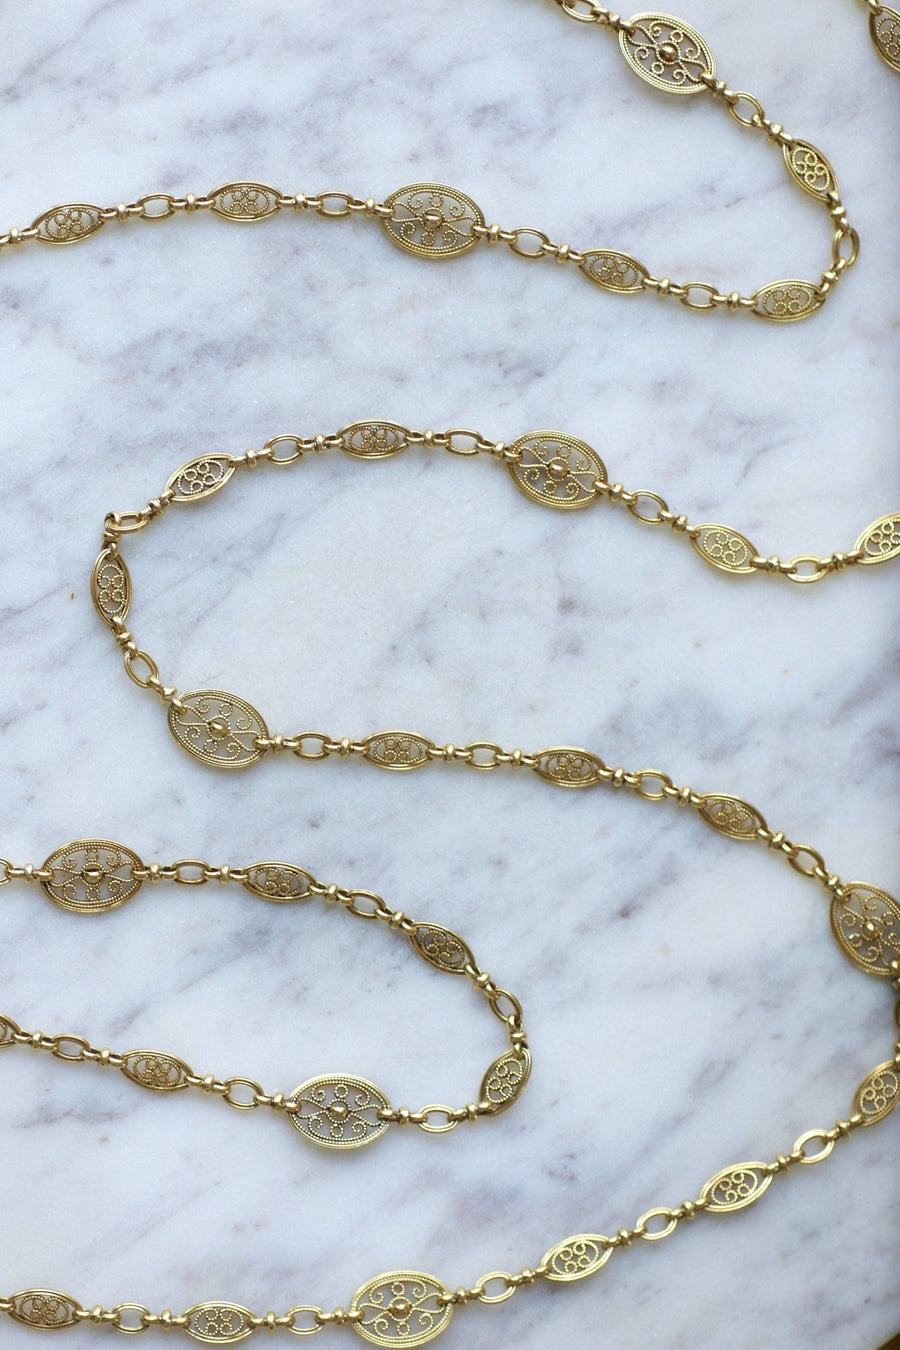 Long necklace, antique gold chain 155 cm oval filigree - Penelope Gallery